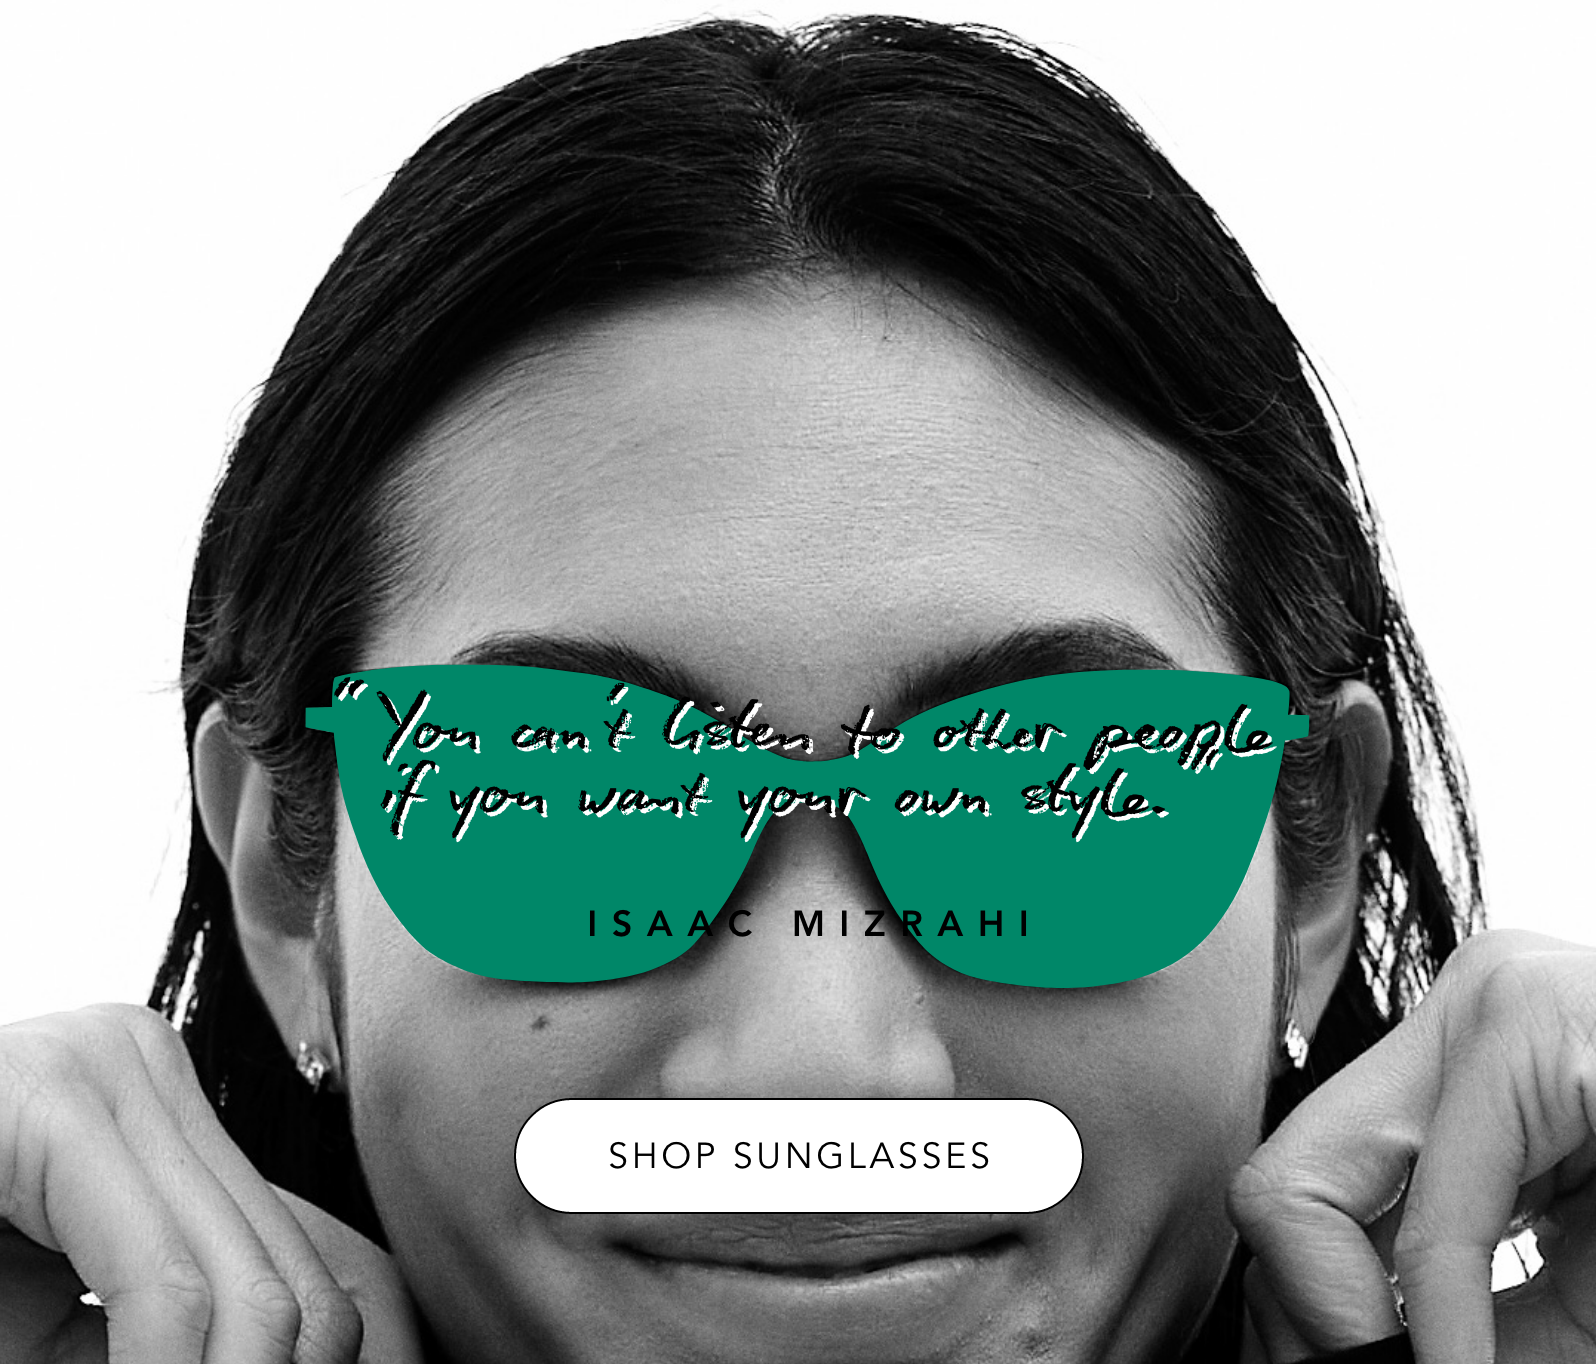 copy saying you cant listen to other people if you want your own style, isaac mizrahi, shop sunglasses. image of model wearing green sungalsses